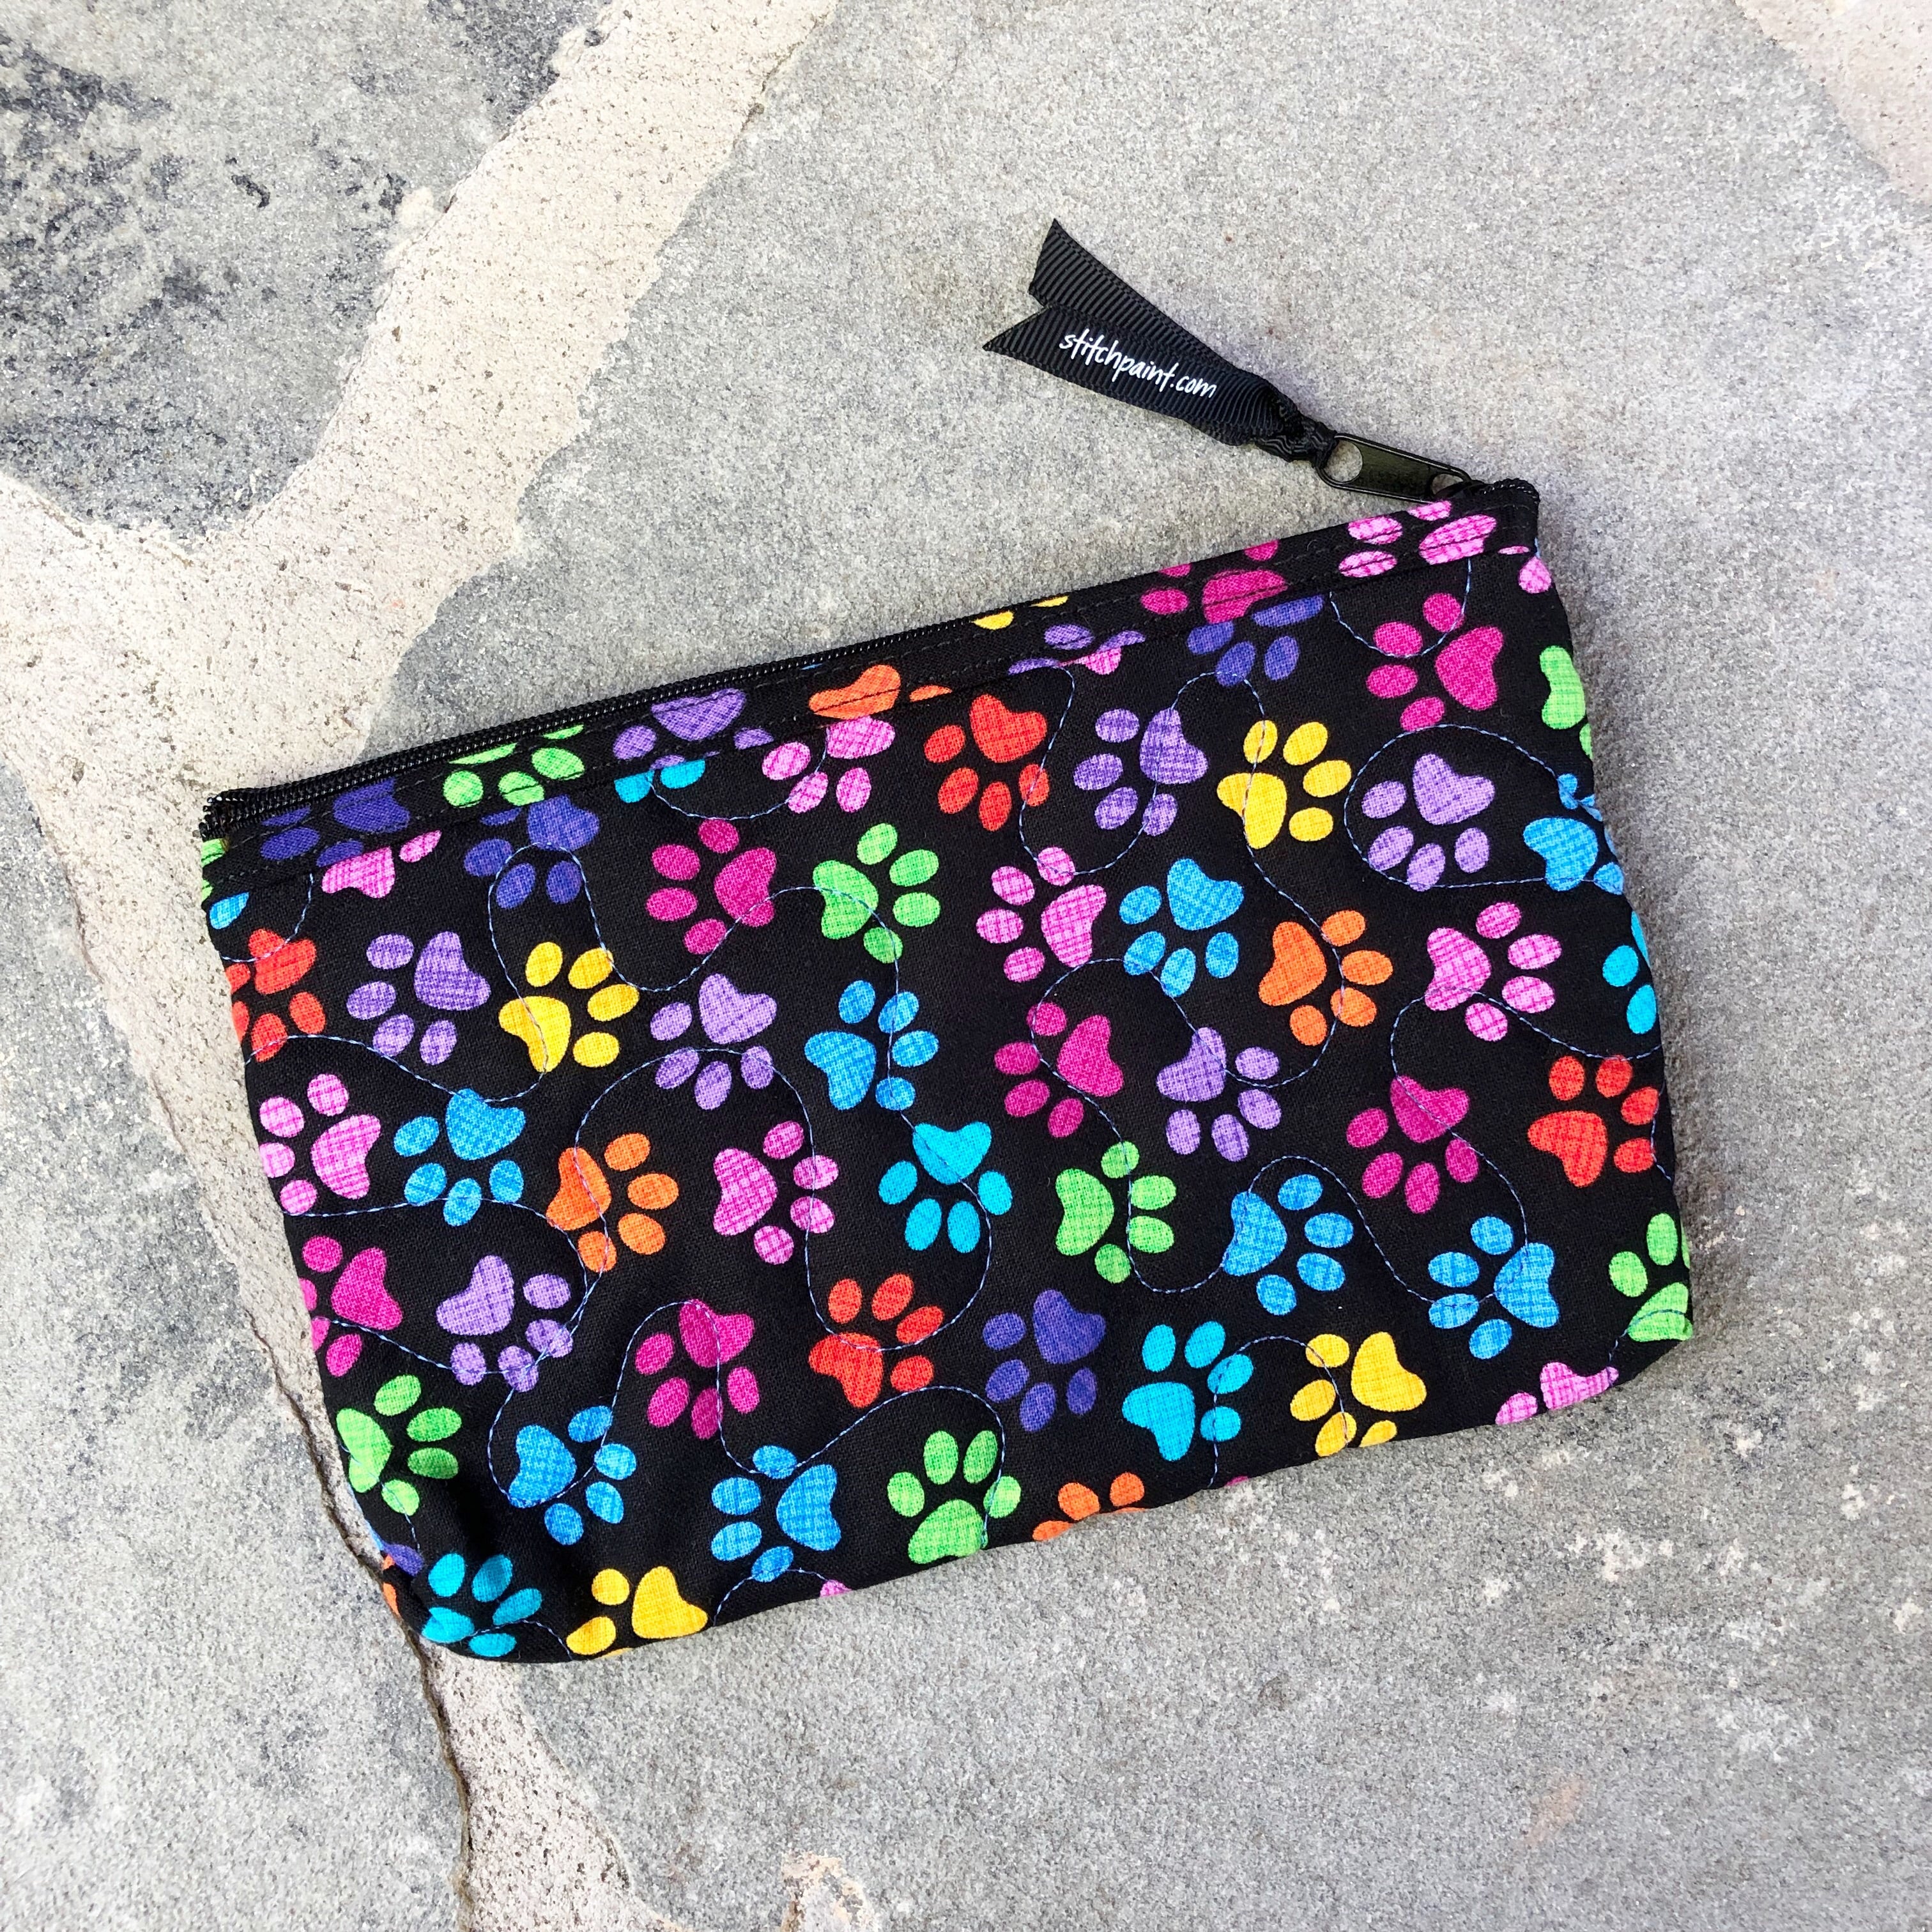 Small Zipper Pouch | Quilted Fabric Zipper Case | Stitchpaint | Paws